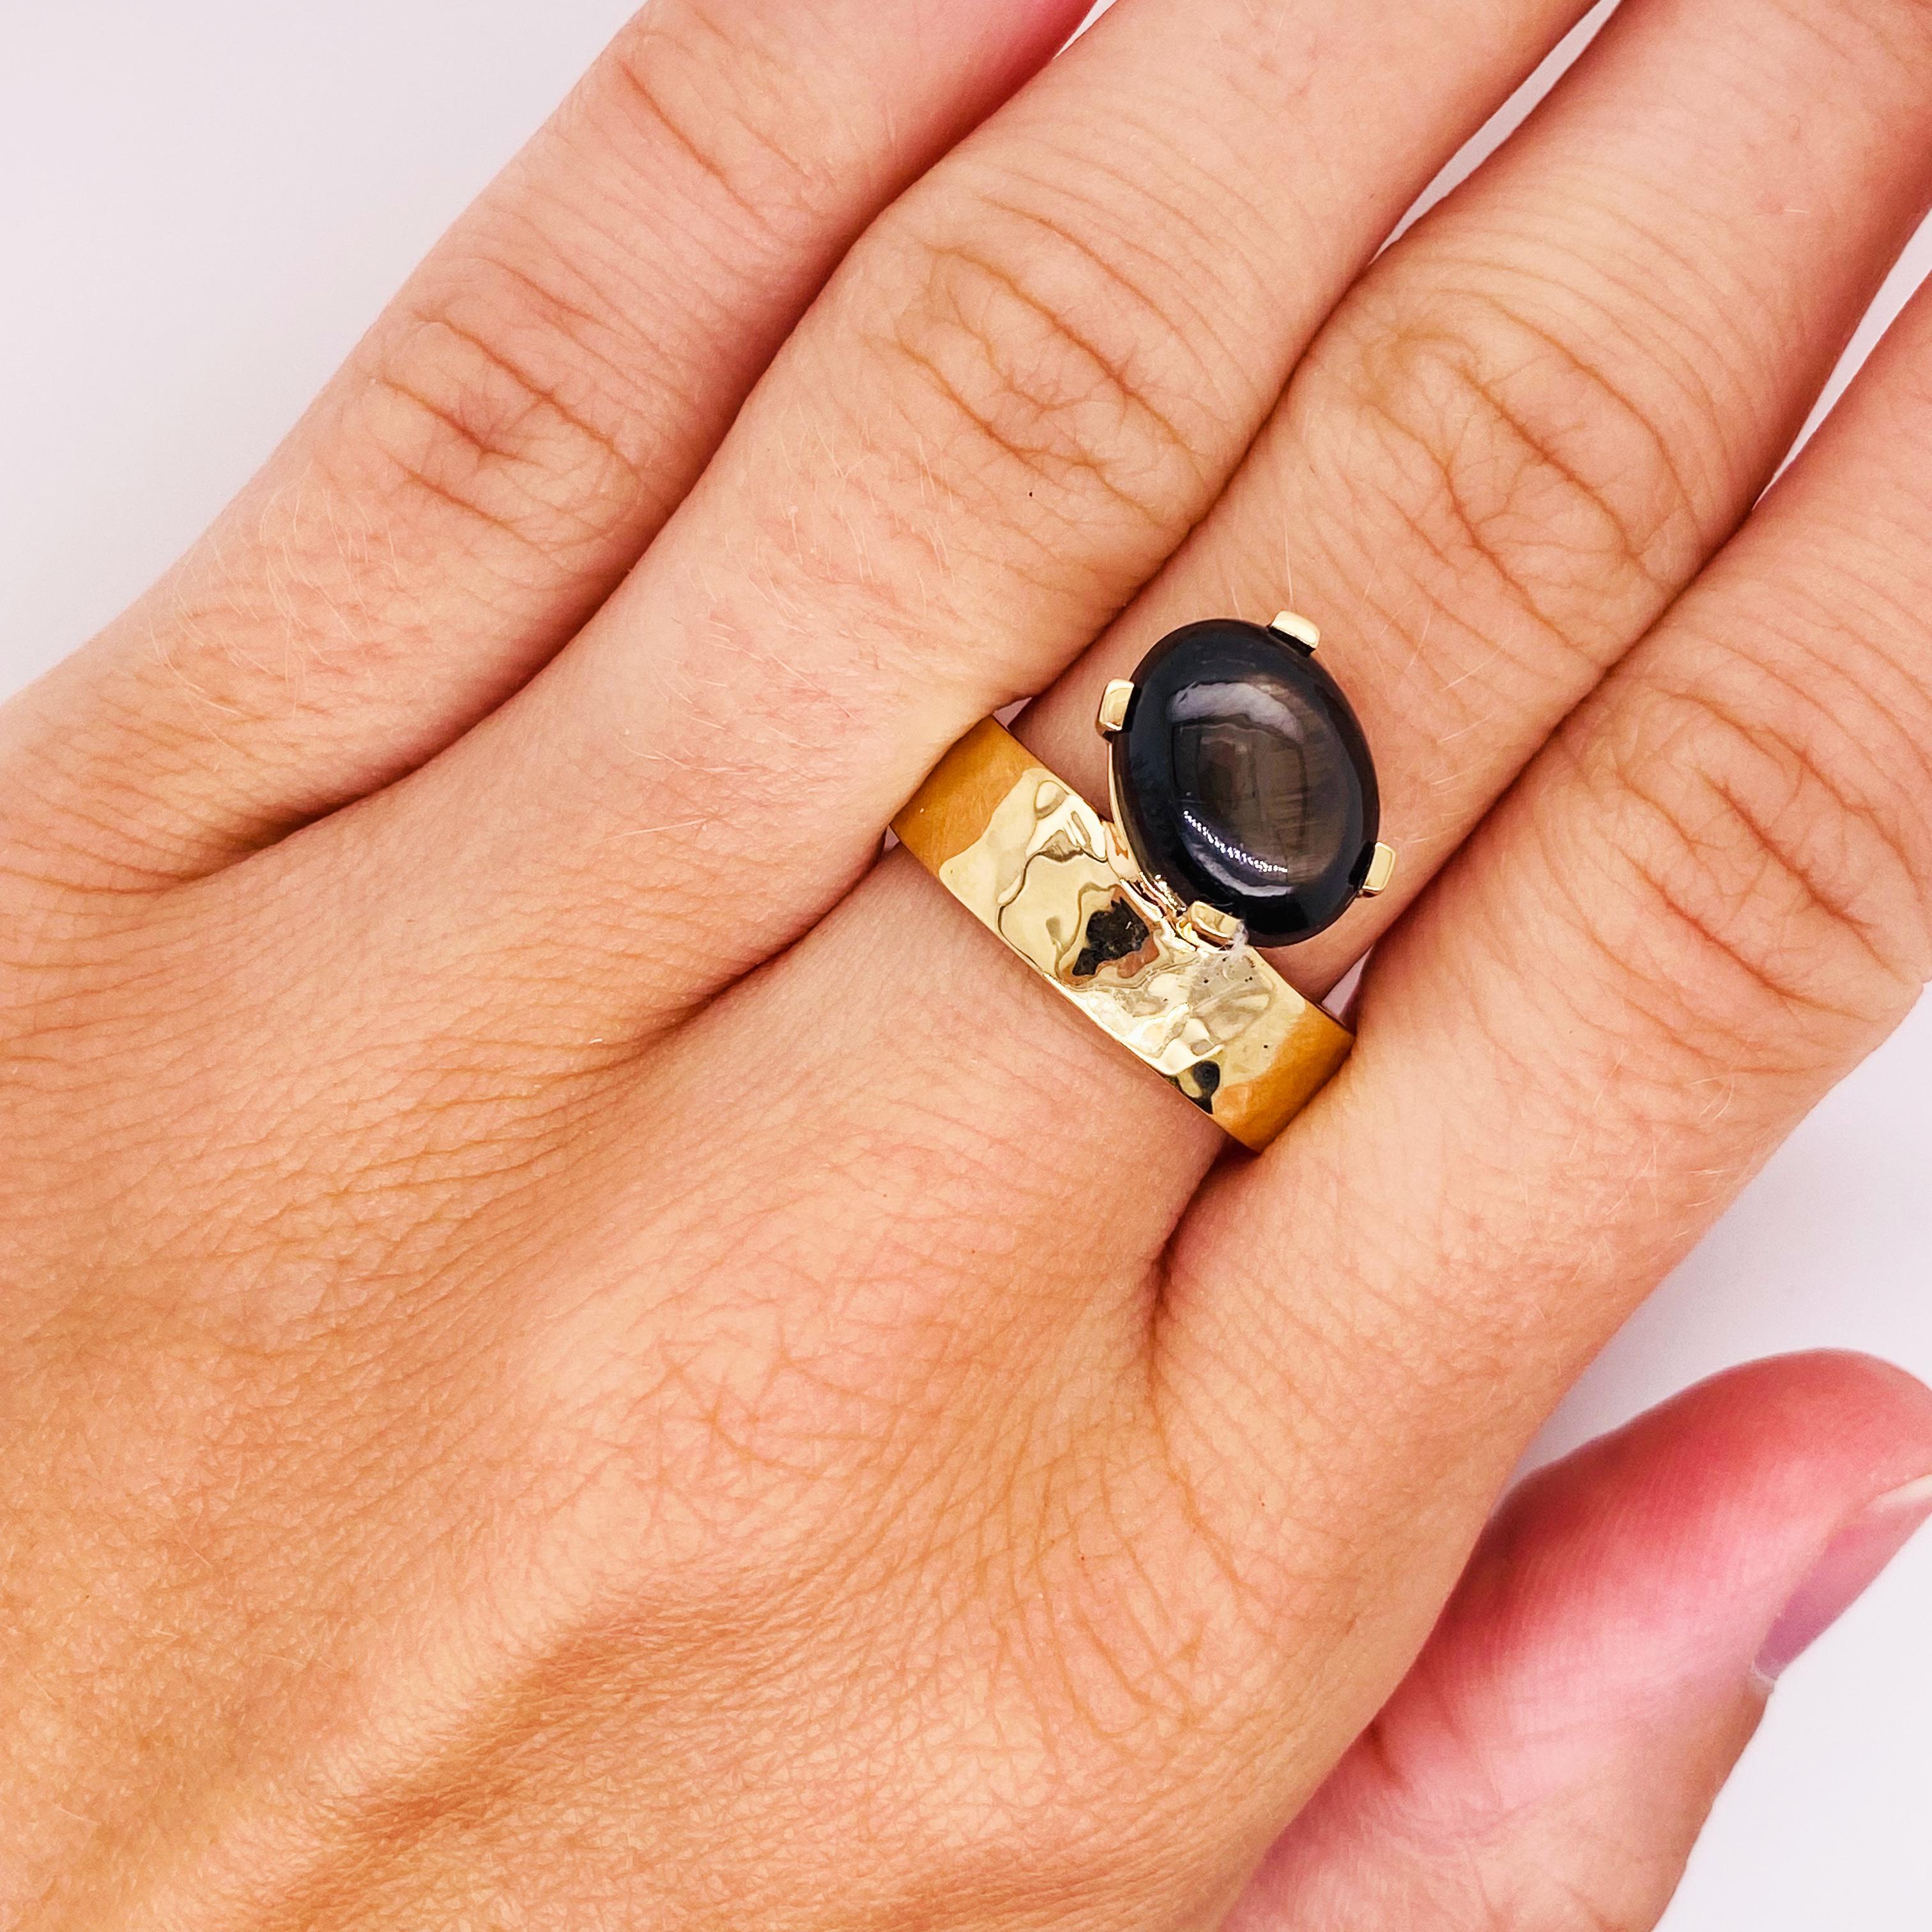 The Bonnie is a genuine black star sapphire that is set on a 14 karat yellow gold band that is a one-of-a-kind ring. The Bonnie has a black star that will roll around in certain light. The gemstone weighs 3.65 carats and is a gorgeous specimen. The